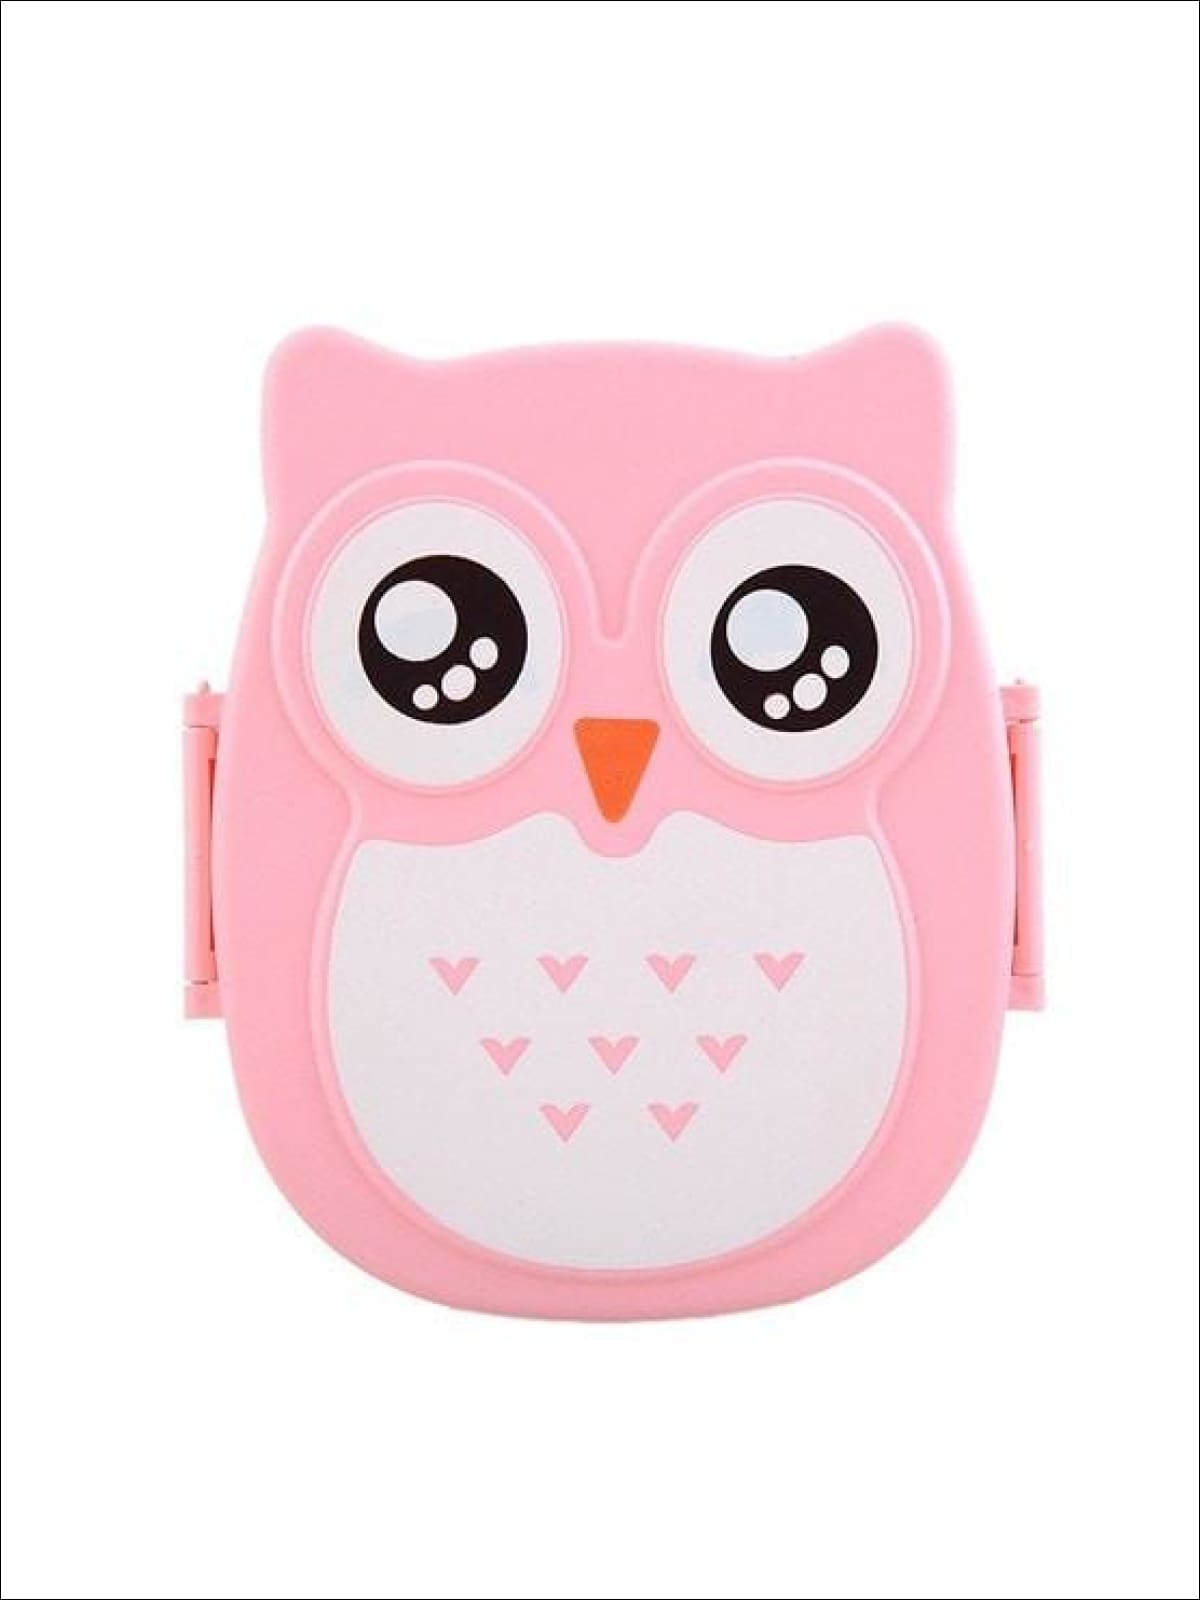 L.O.L. Surprise! Sweet Tooth Lunch Bag - Pink